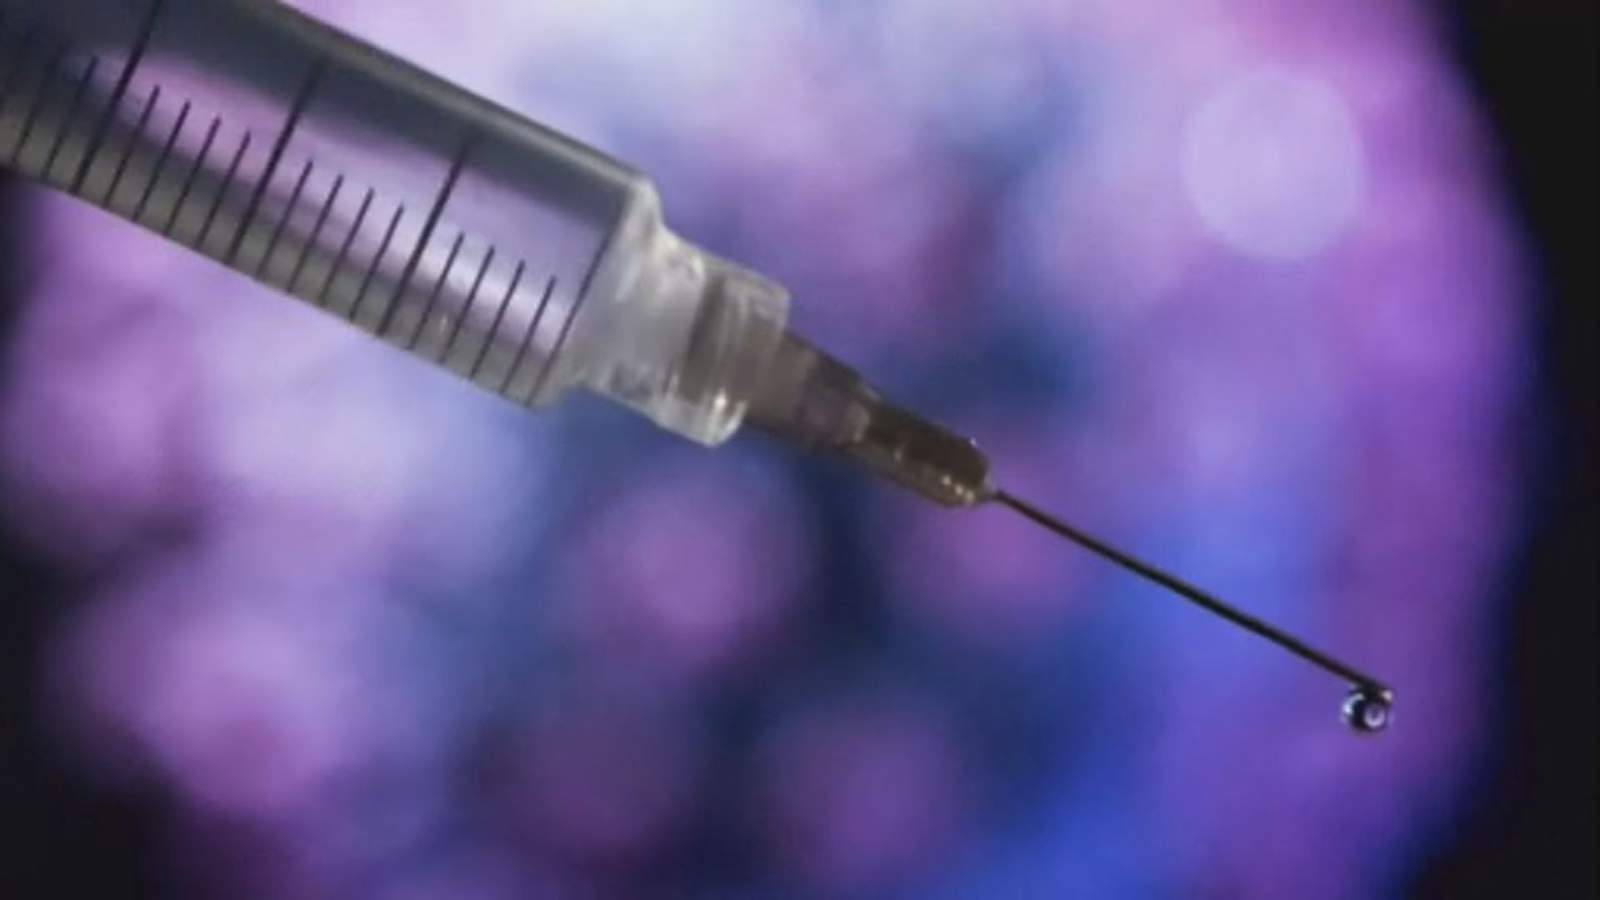 Less than half of Americans say theyll get a vaccine for coronavirus